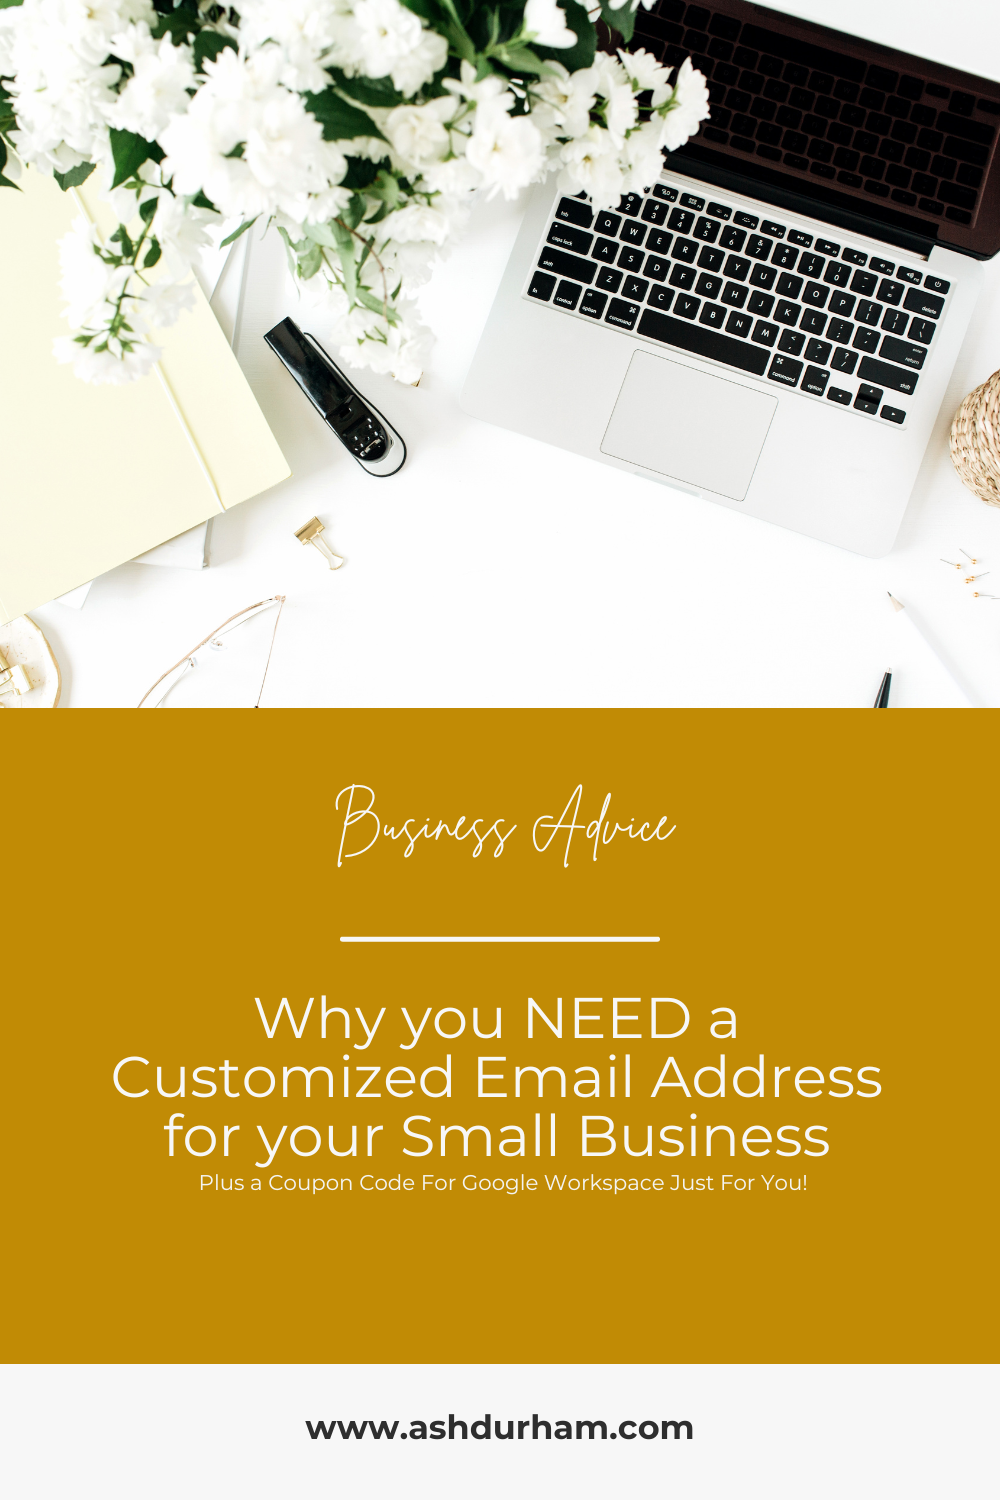 Why you NEED a Customized Email Address for your Small Business